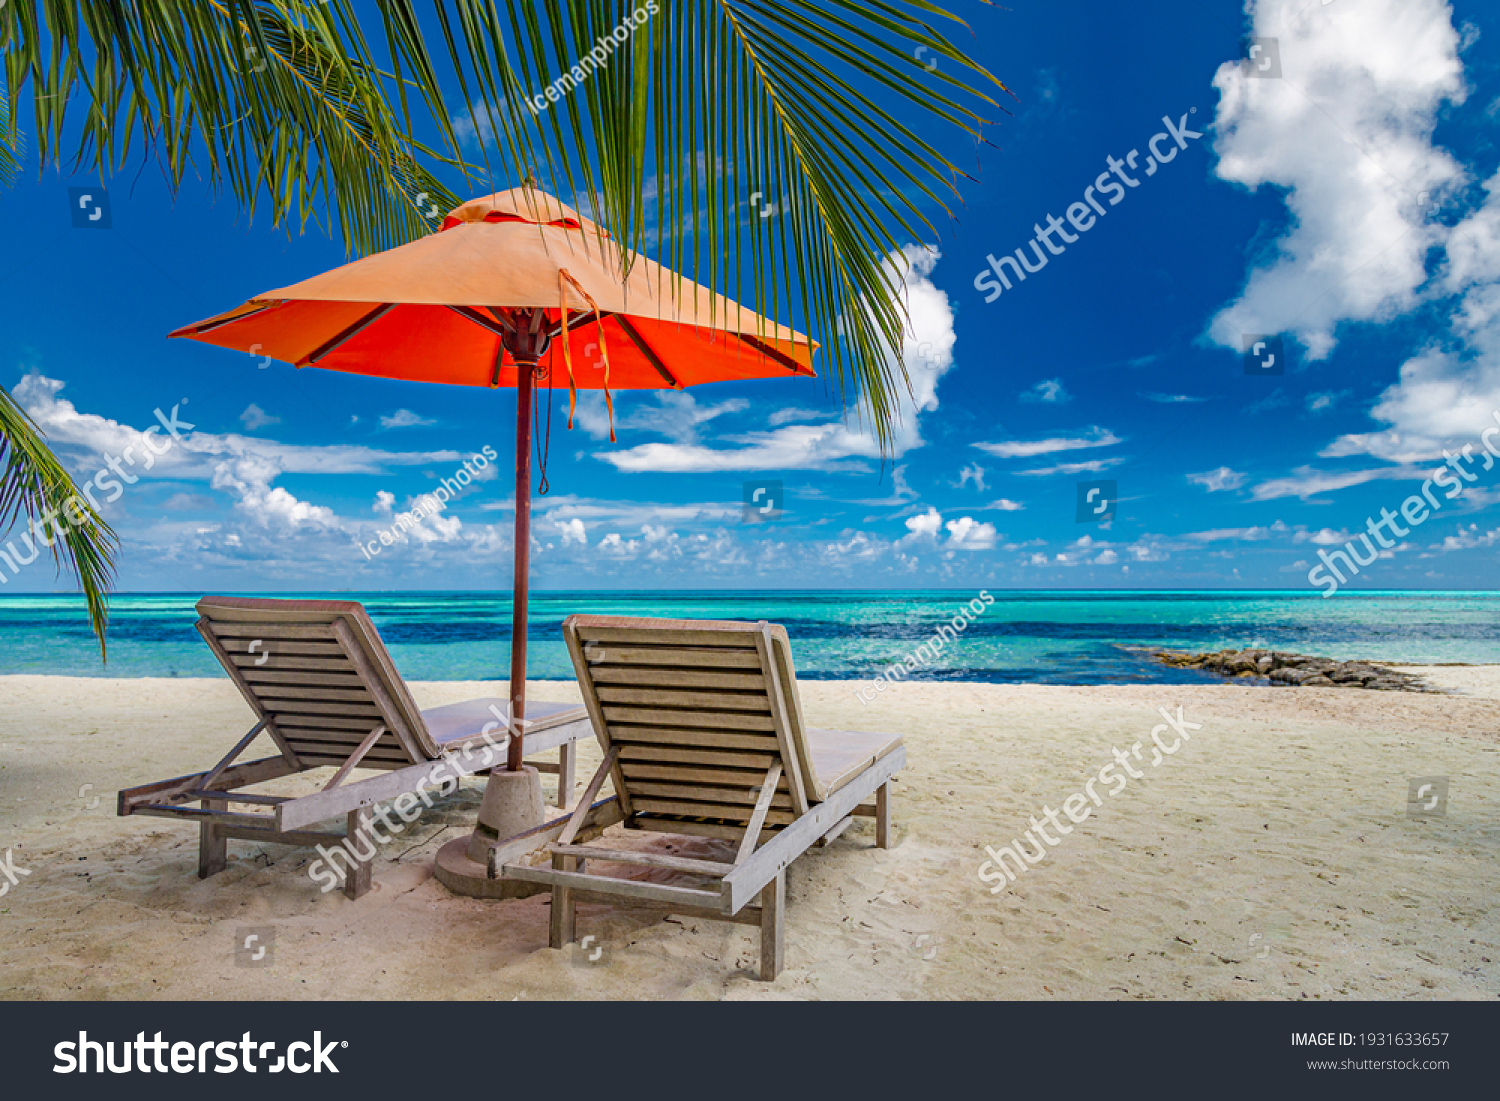 Beautiful tropical island scenery, two sun beds, loungers, umbrella under palm tree. White sand, sea view with horizon, idyllic blue sky, calmness and relaxation. Inspirational beach resort hotel #1931633657